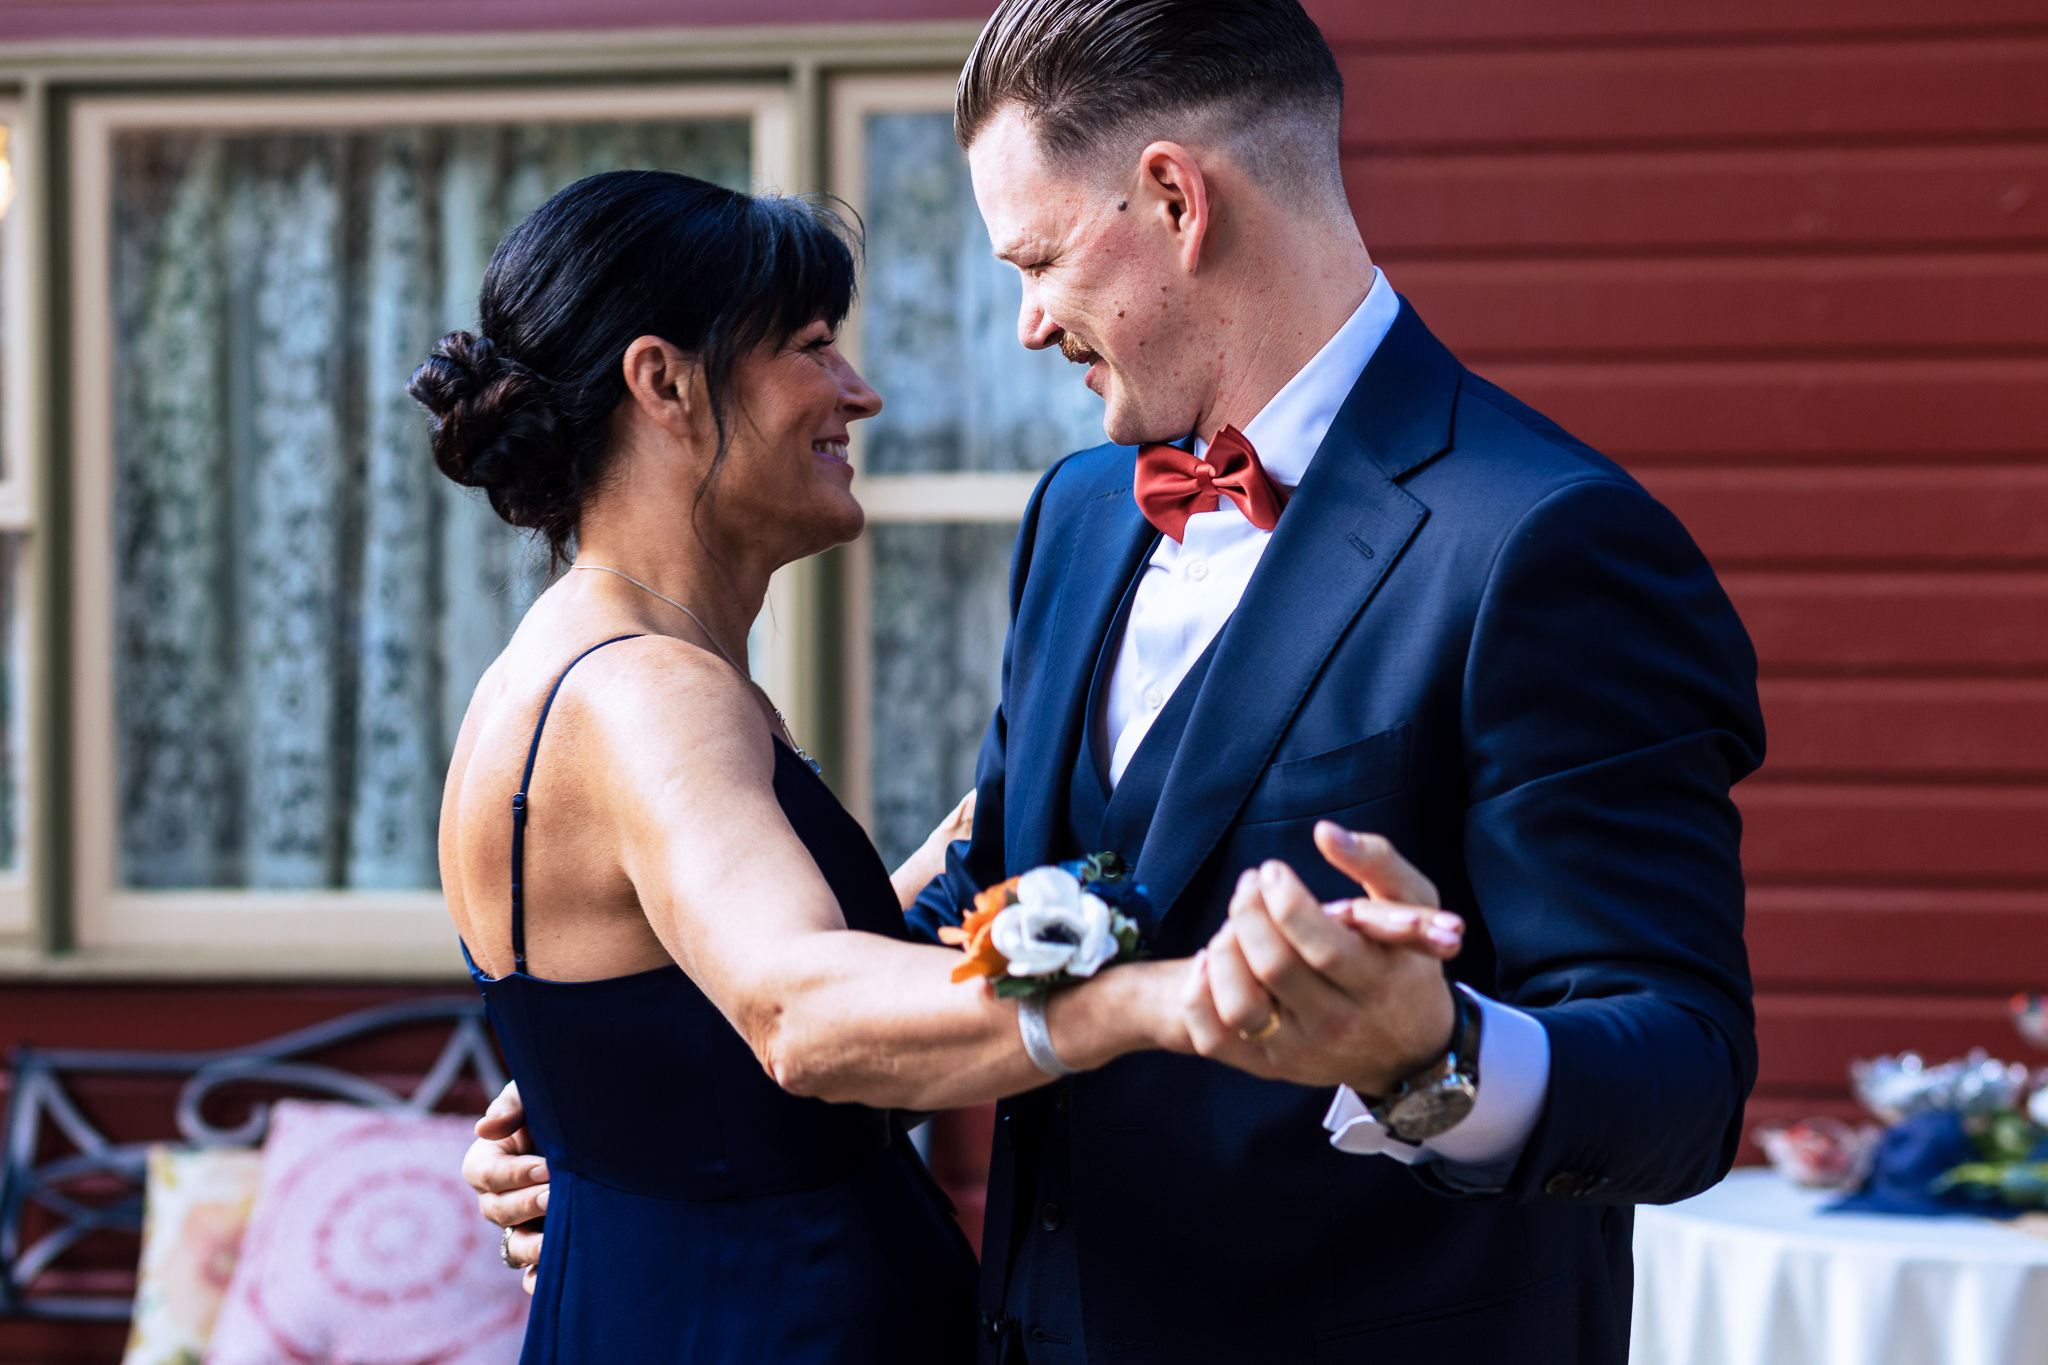 Groom & his mother dancing for the Mother, Son Dance for Haley & Gytenis' Summer Wedding at The McCreery House by Colorado Wedding Photographer, Jennifer Garza.